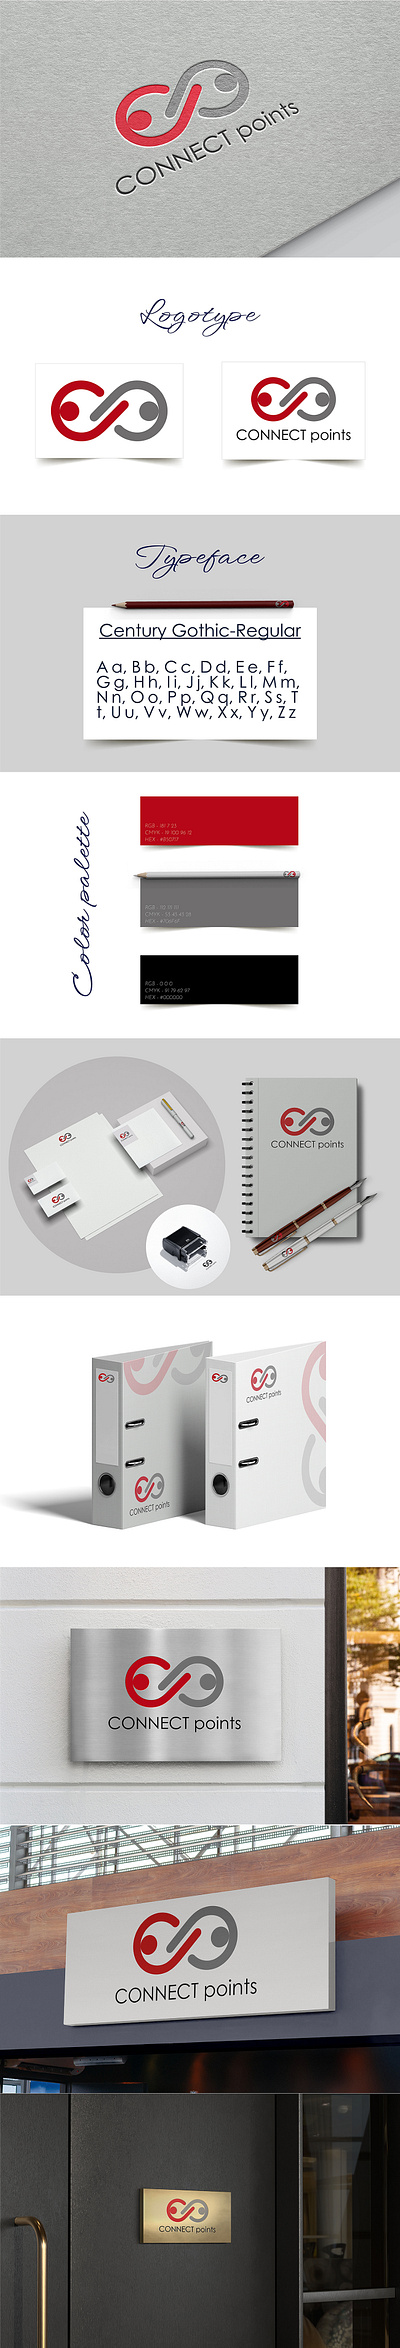 Logo and brand identity for a consulting company branddesign branddesigner brandidentity branding consulting corporatestyle creativelogo designbrand designer designerlogo graphic design labeldesigns logo logobranding logocreation logodesign logomarker logotype mockups style